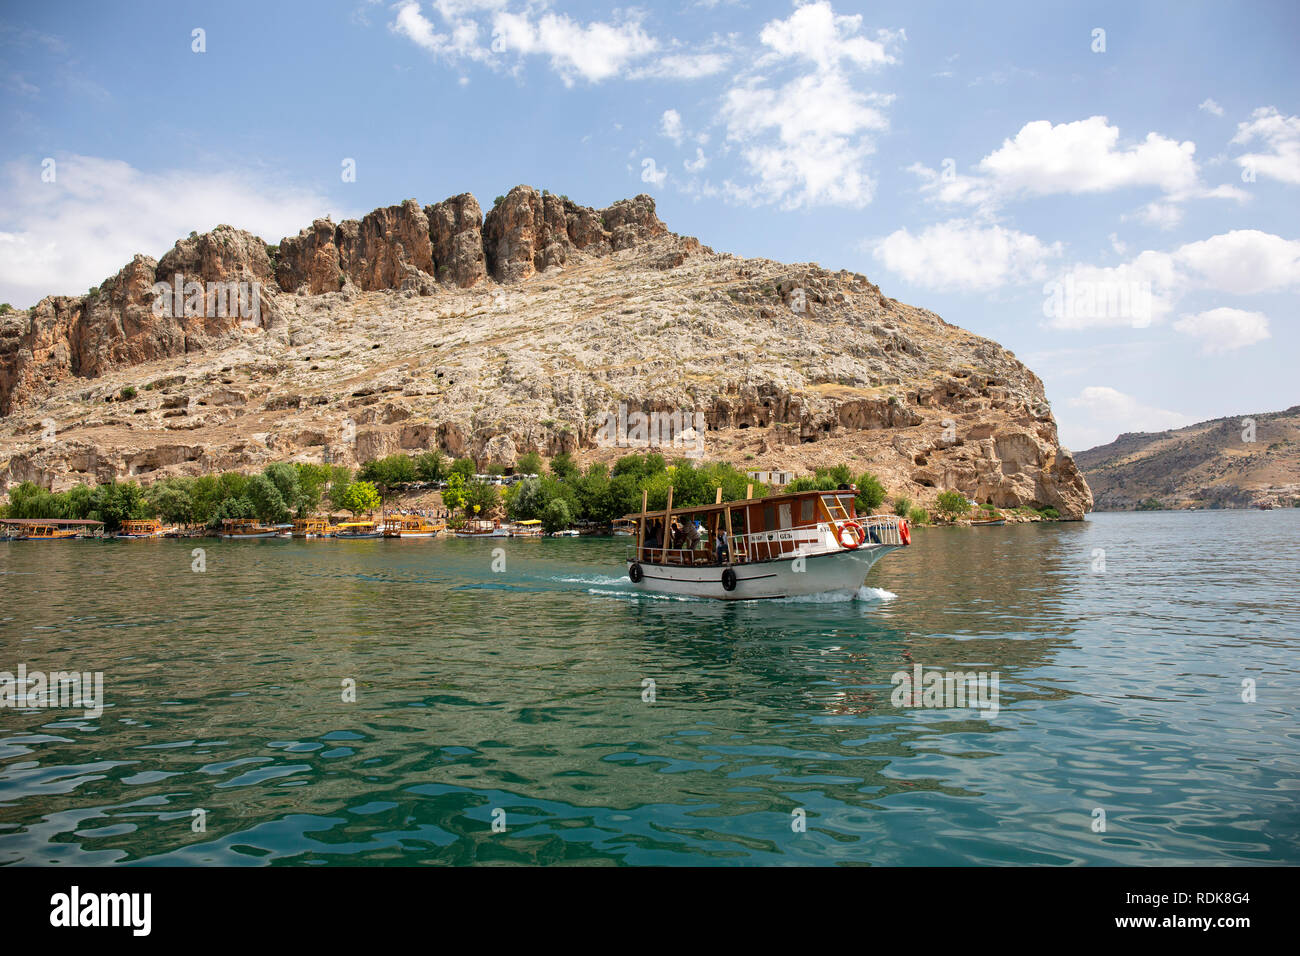 Gaziantep, Turkey - June 08, 2014: Tourist trip boat in Rumkale on June 08, 2014. Rumkale is located on a hill covered by high rocks, where the Firat  Stock Photo